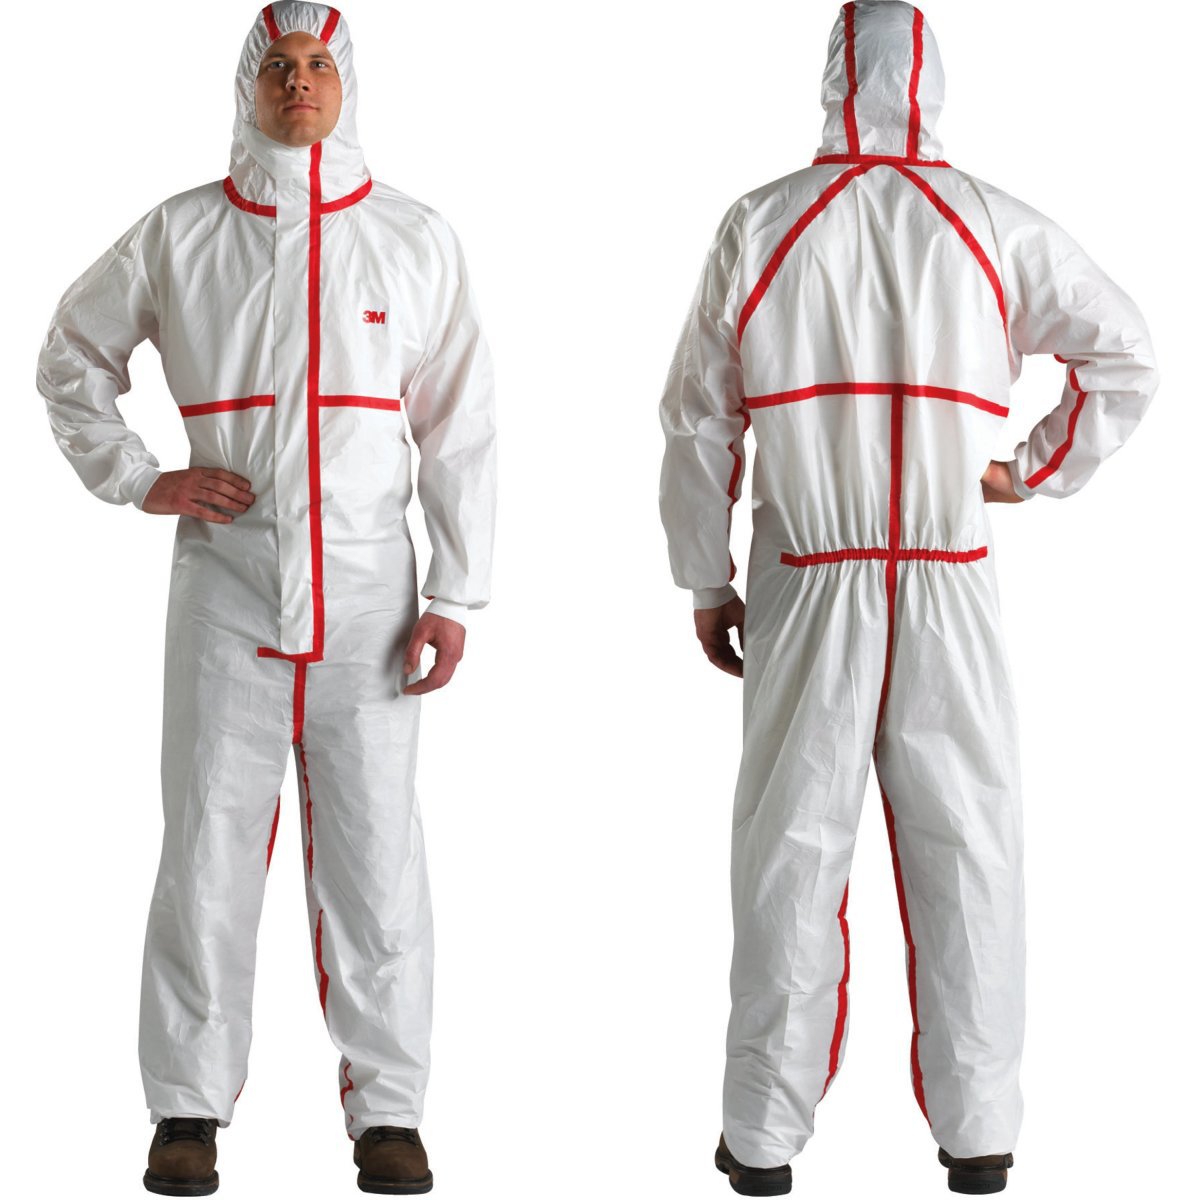 3M™ Disposable Chemical Protective Coverall 4565 Bulk XL White (Availability restrictions apply.)